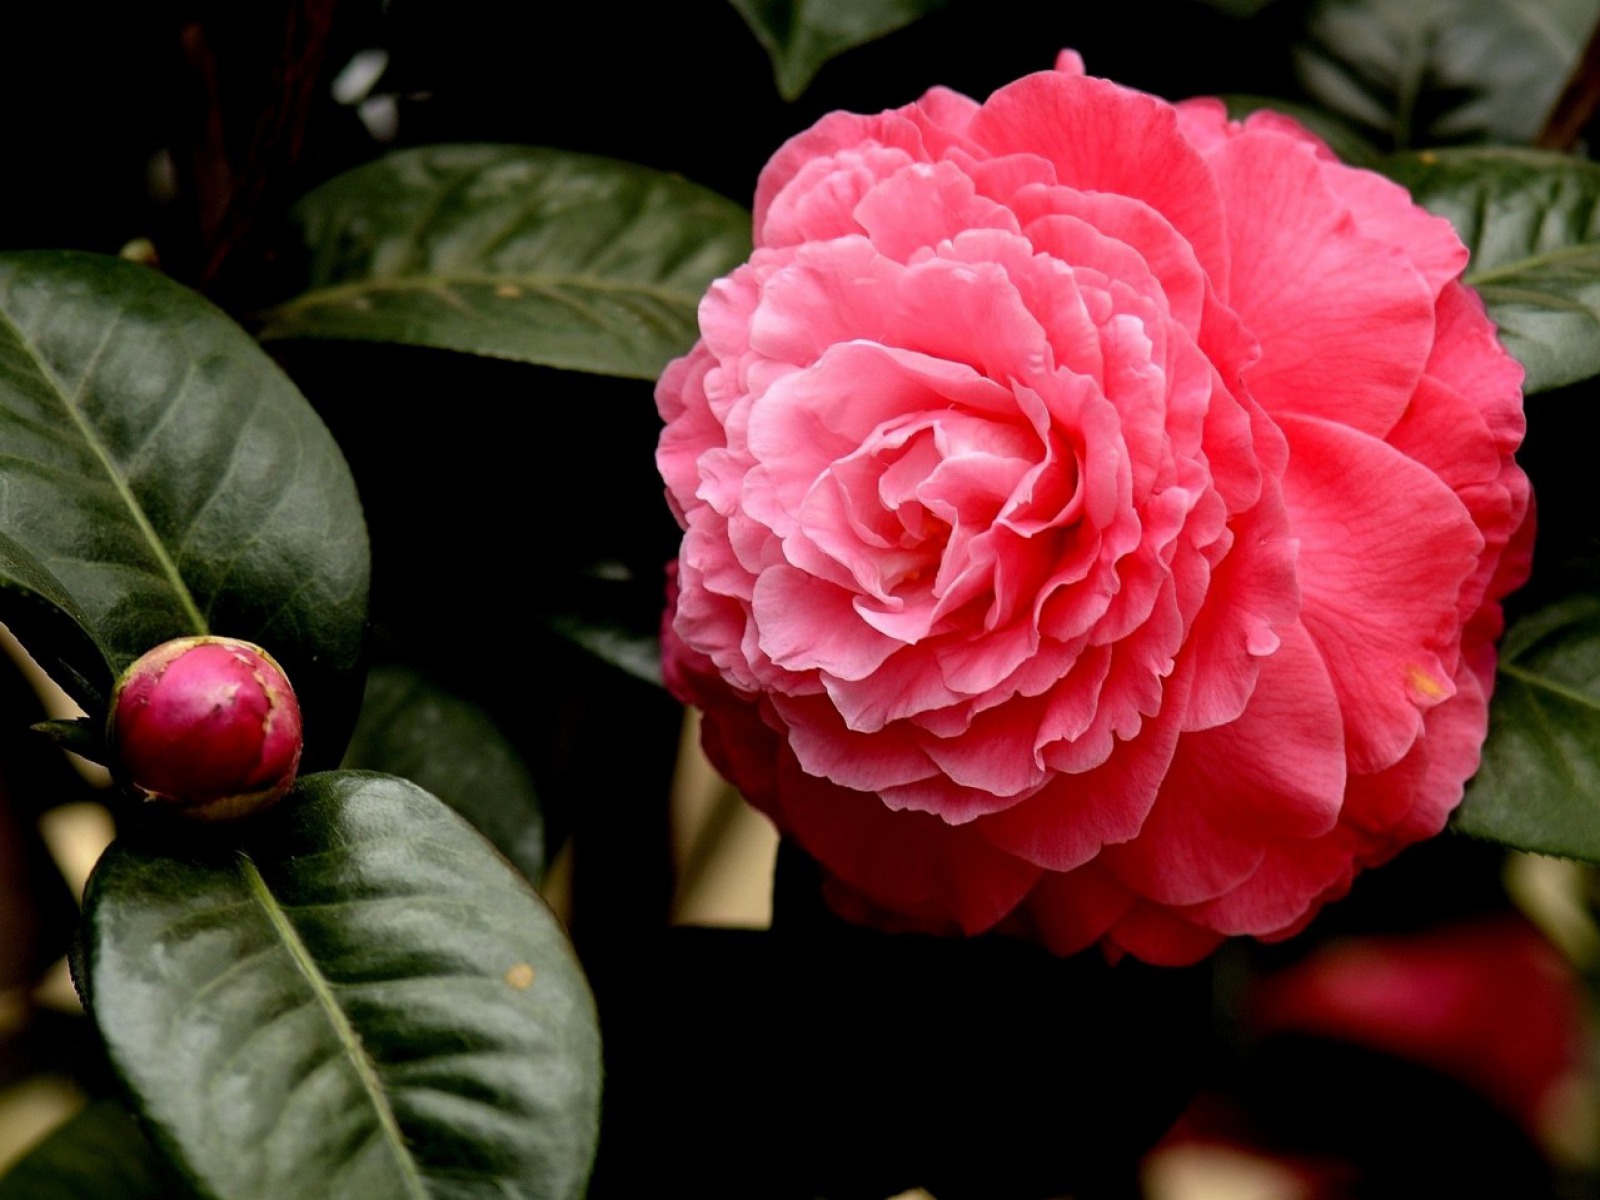 earth, camellia, flower, nature, pink flower, flowers